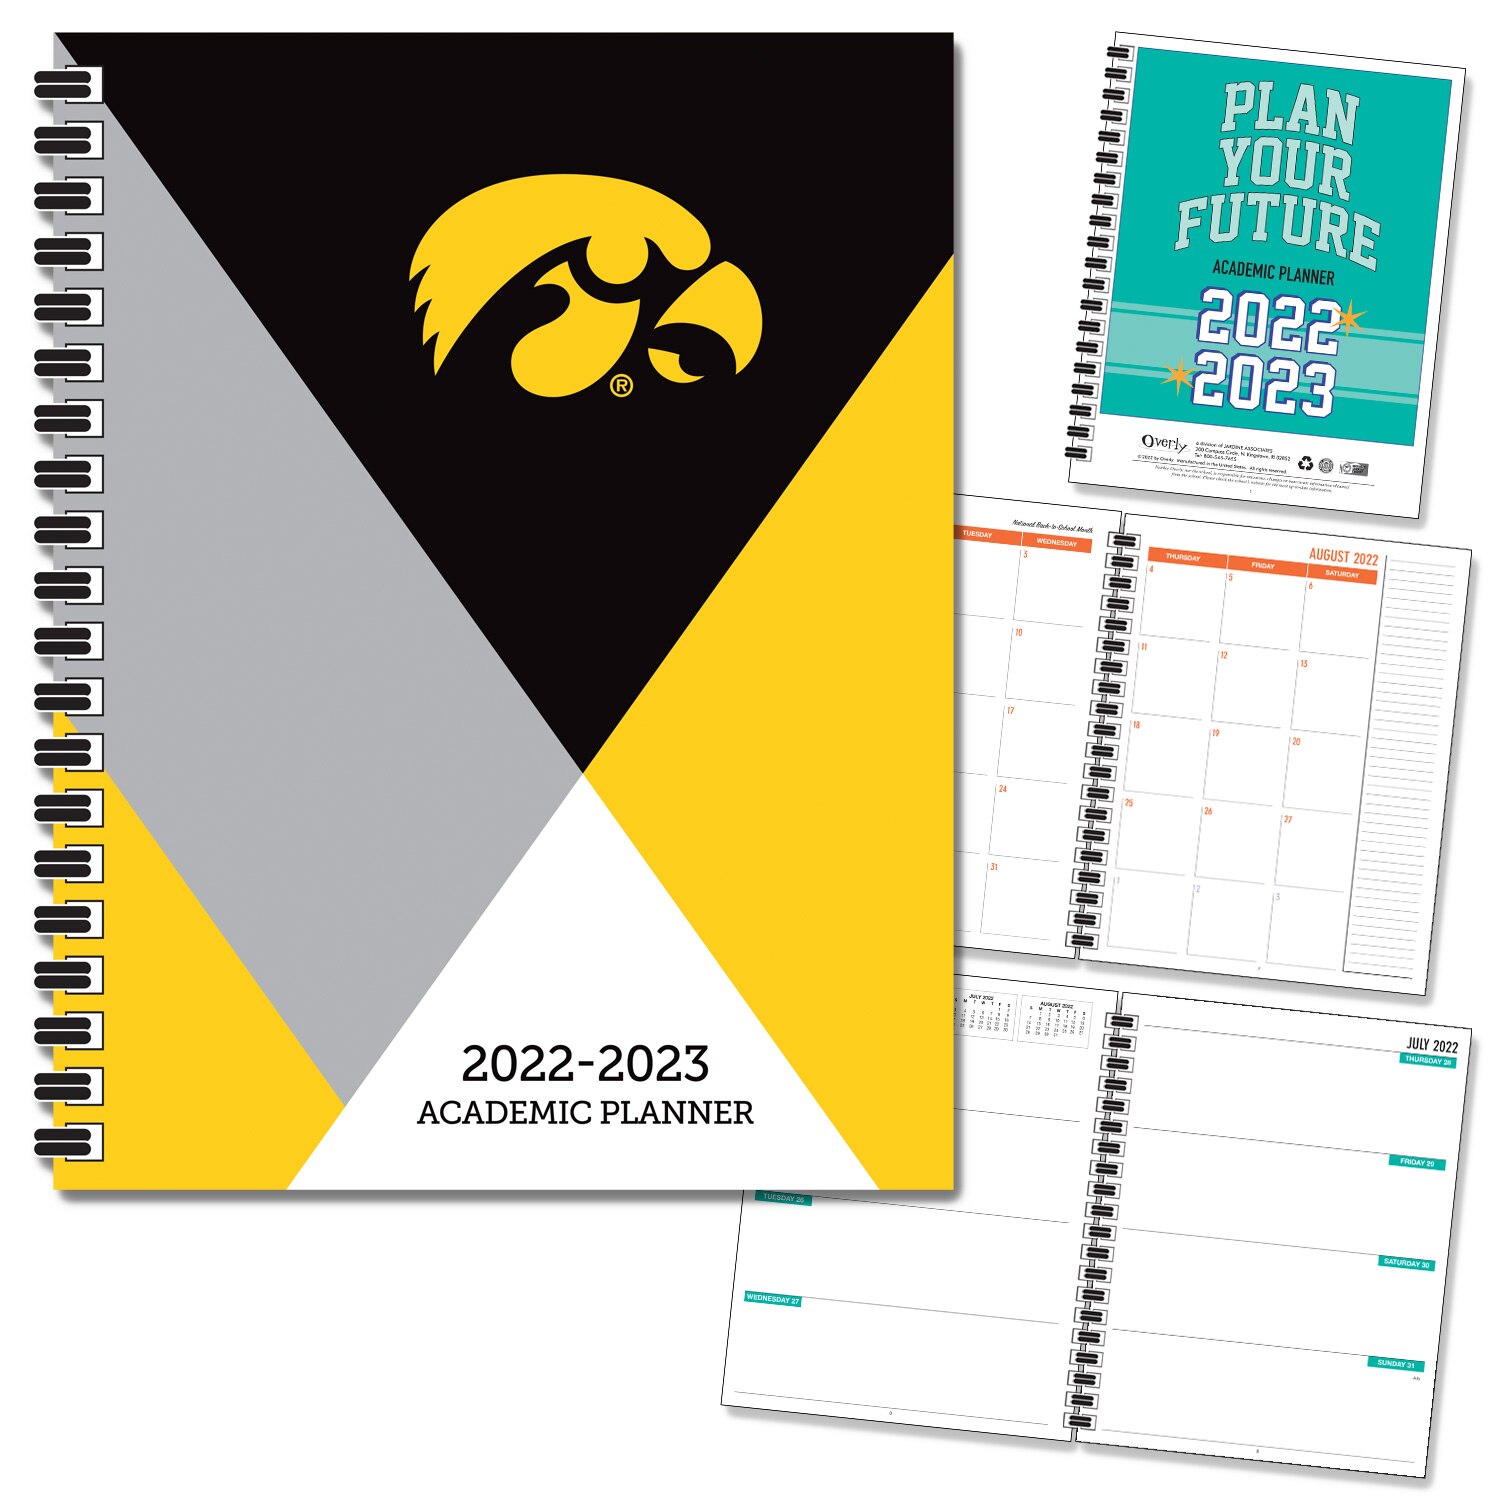 FY 23 Traditional Soft Touch Spot Varnish - Mascot Imprinted Planner  7x9